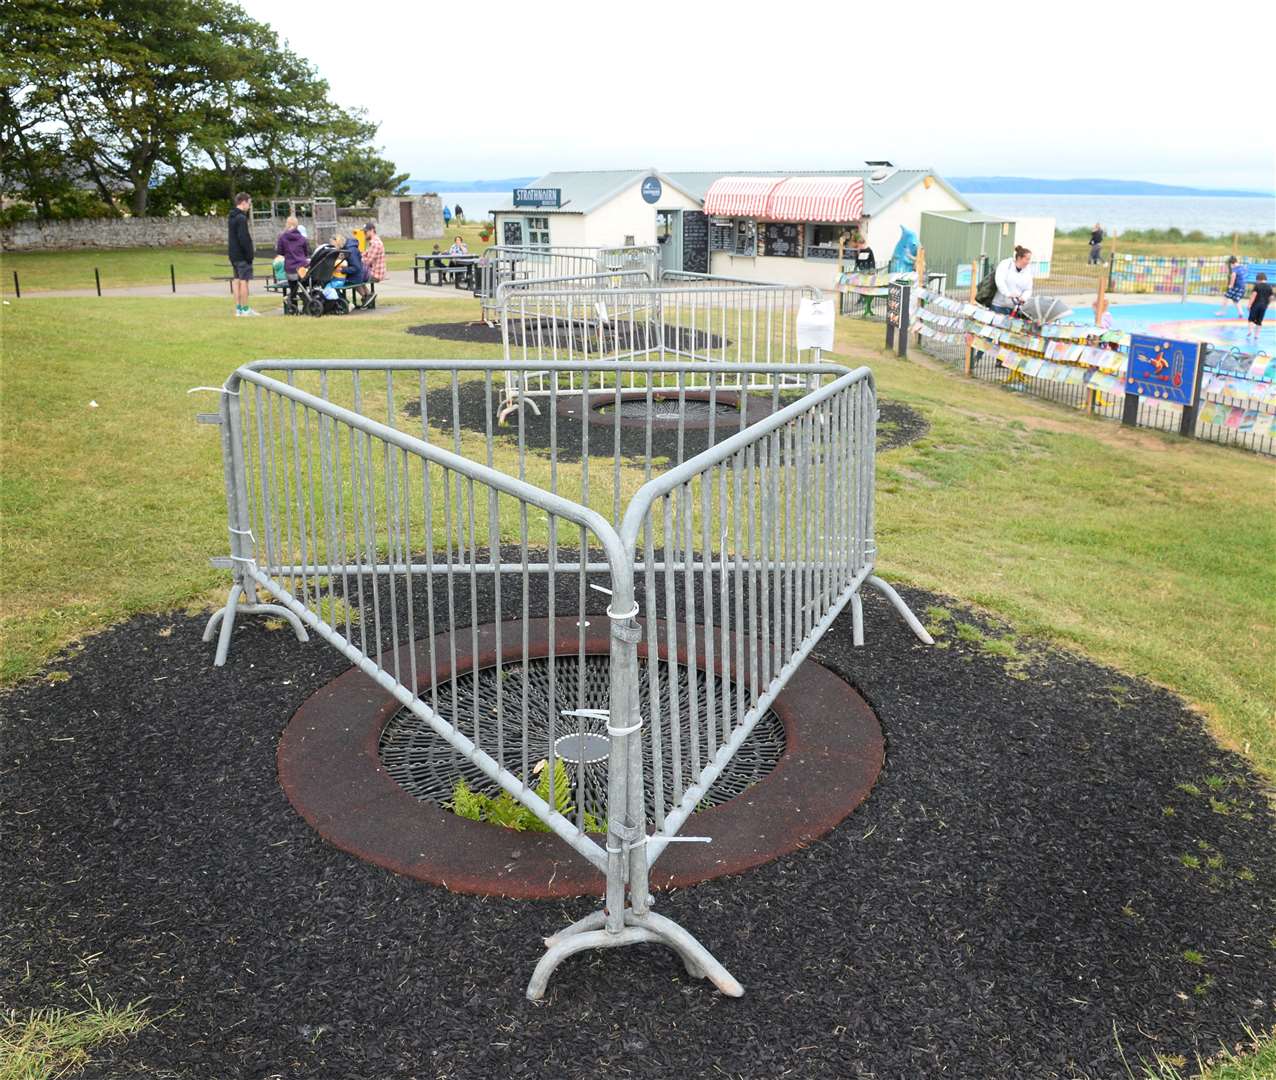 Three trampolines out of action on Nairn Links.